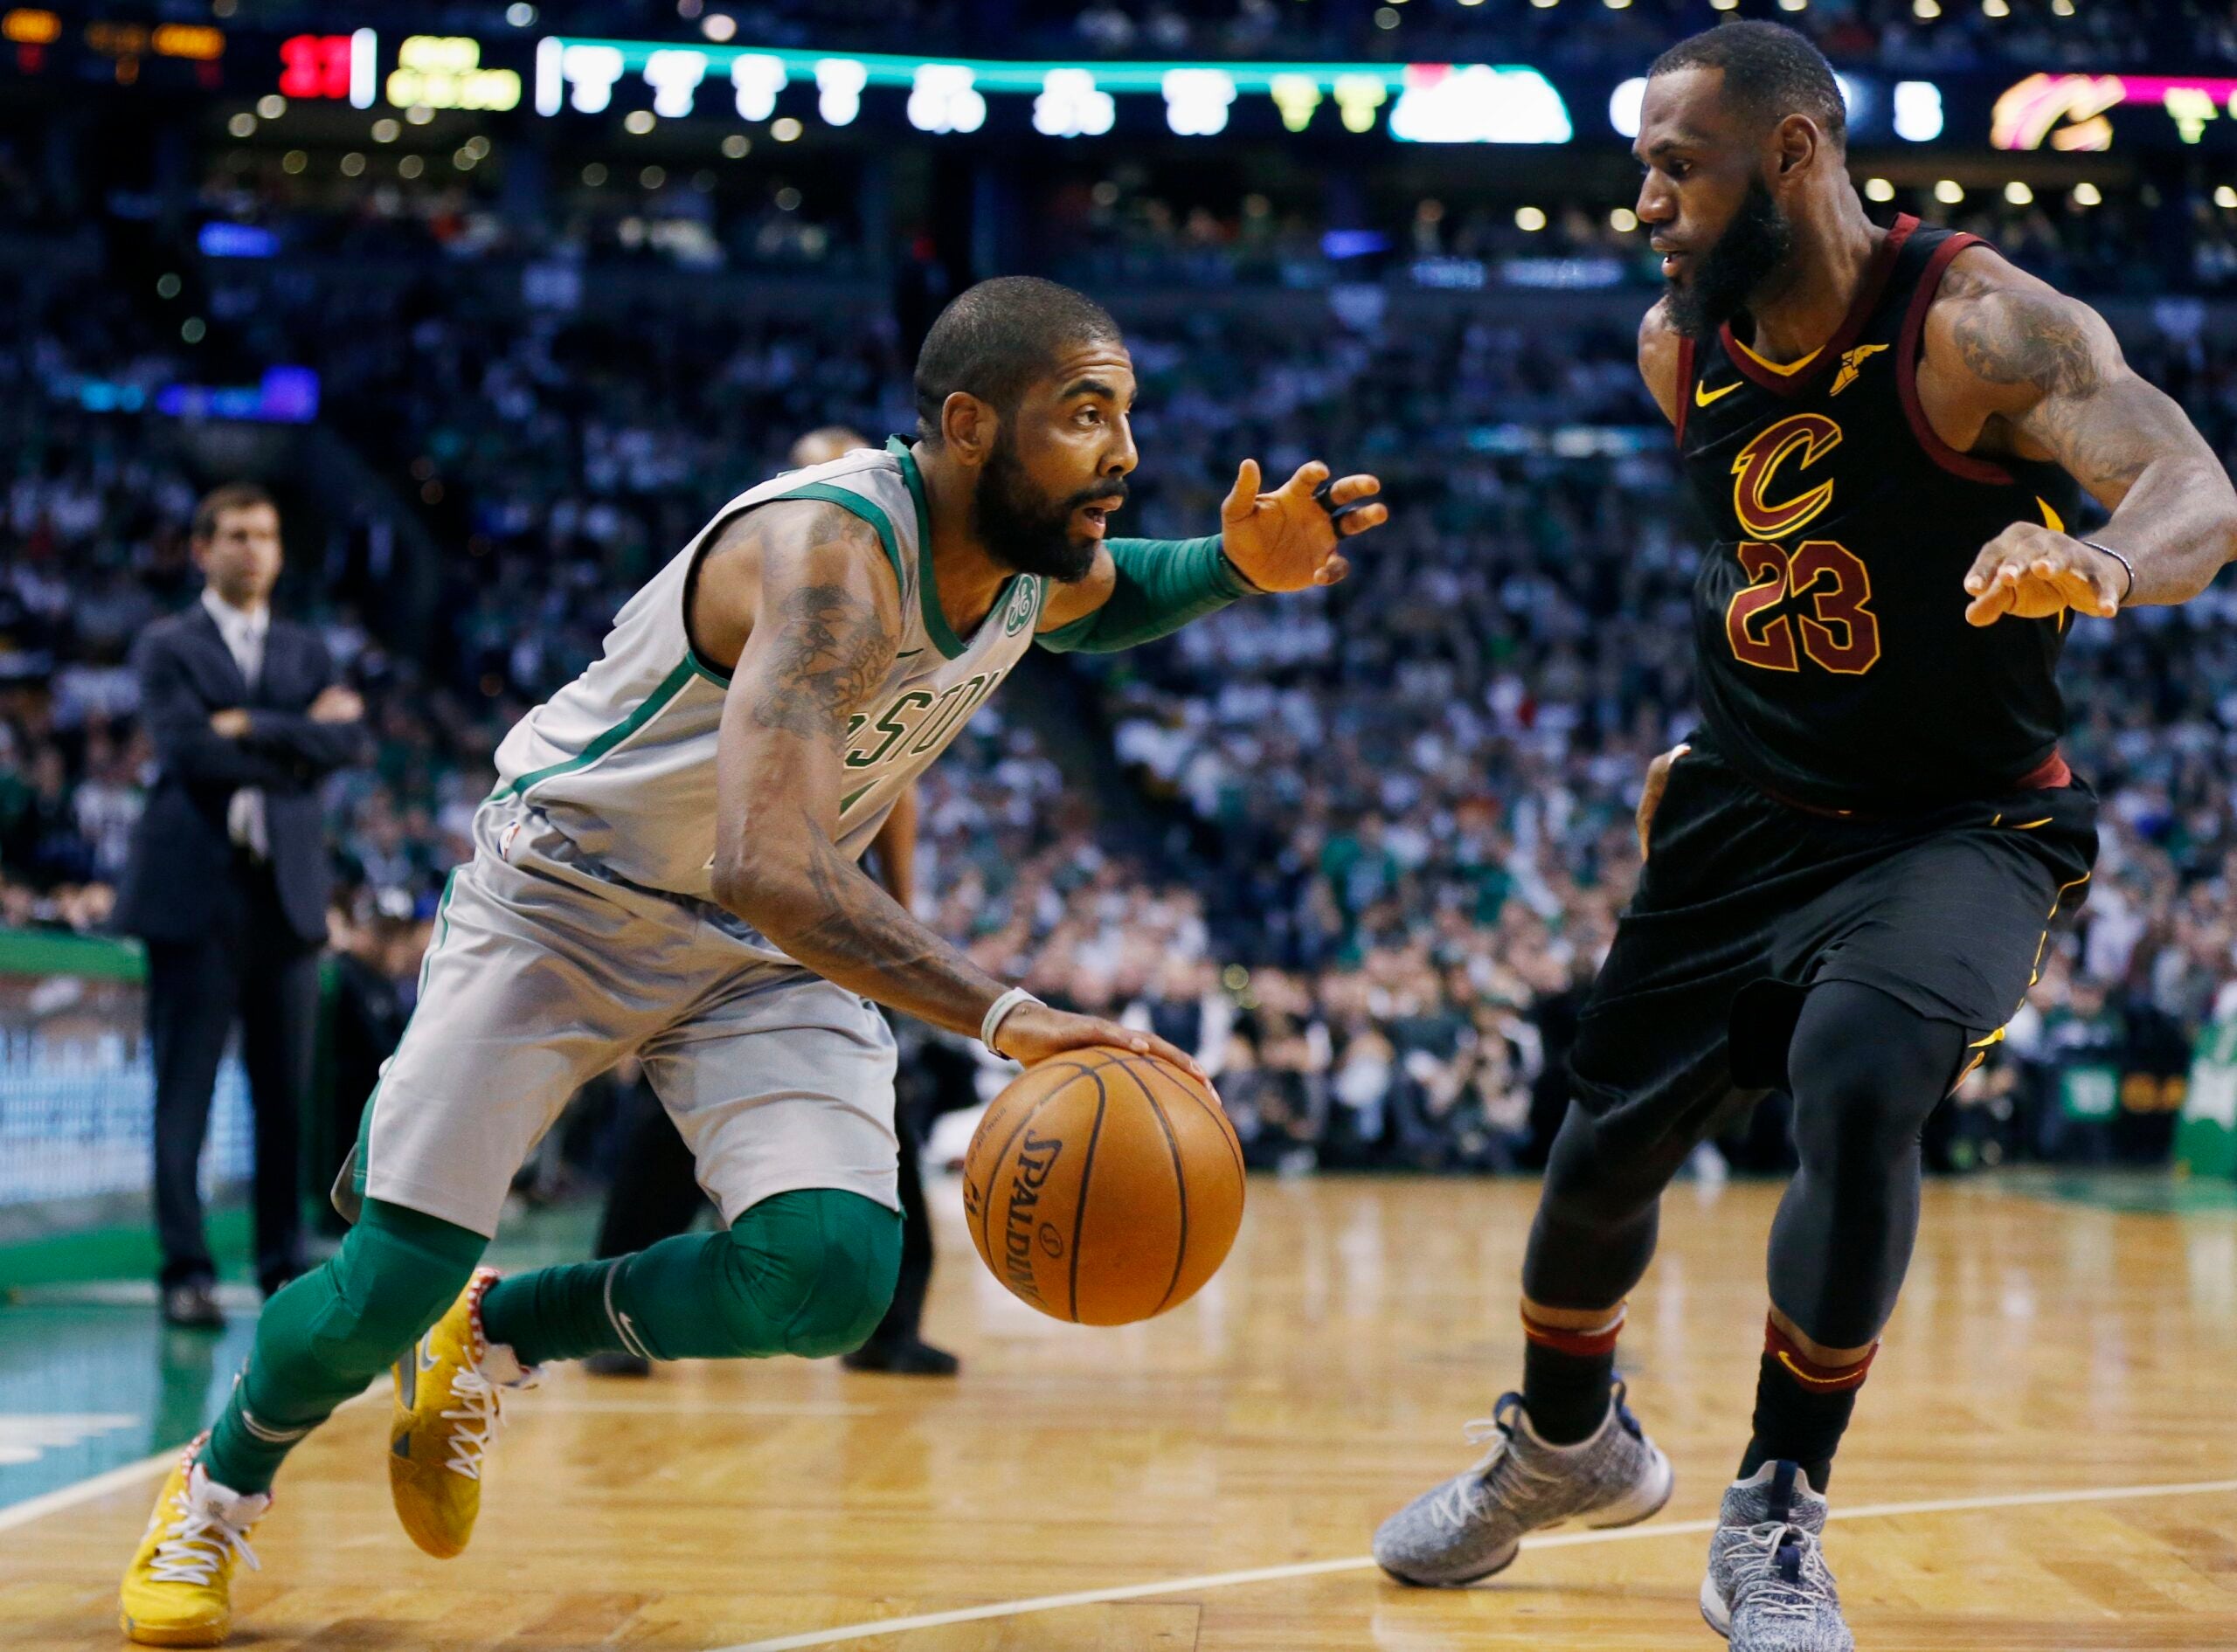 LeBron James says he asked the Cavaliers not to trade Kyrie Irving